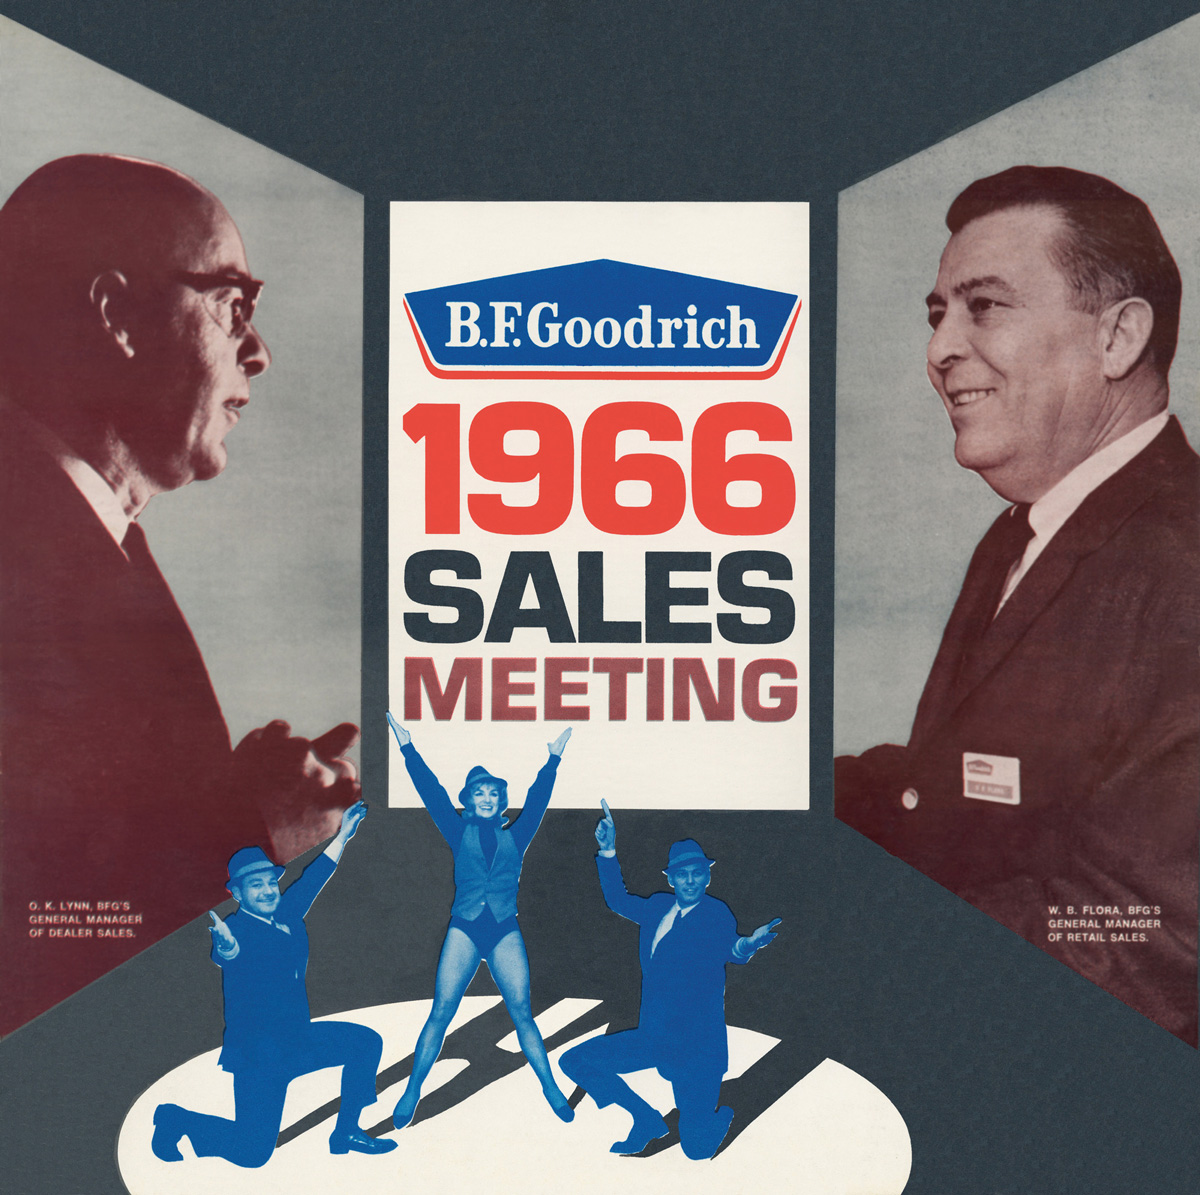 An album cover from 1966 for a B.F. Goodrich show, titled “1966 Sales Meeting.”